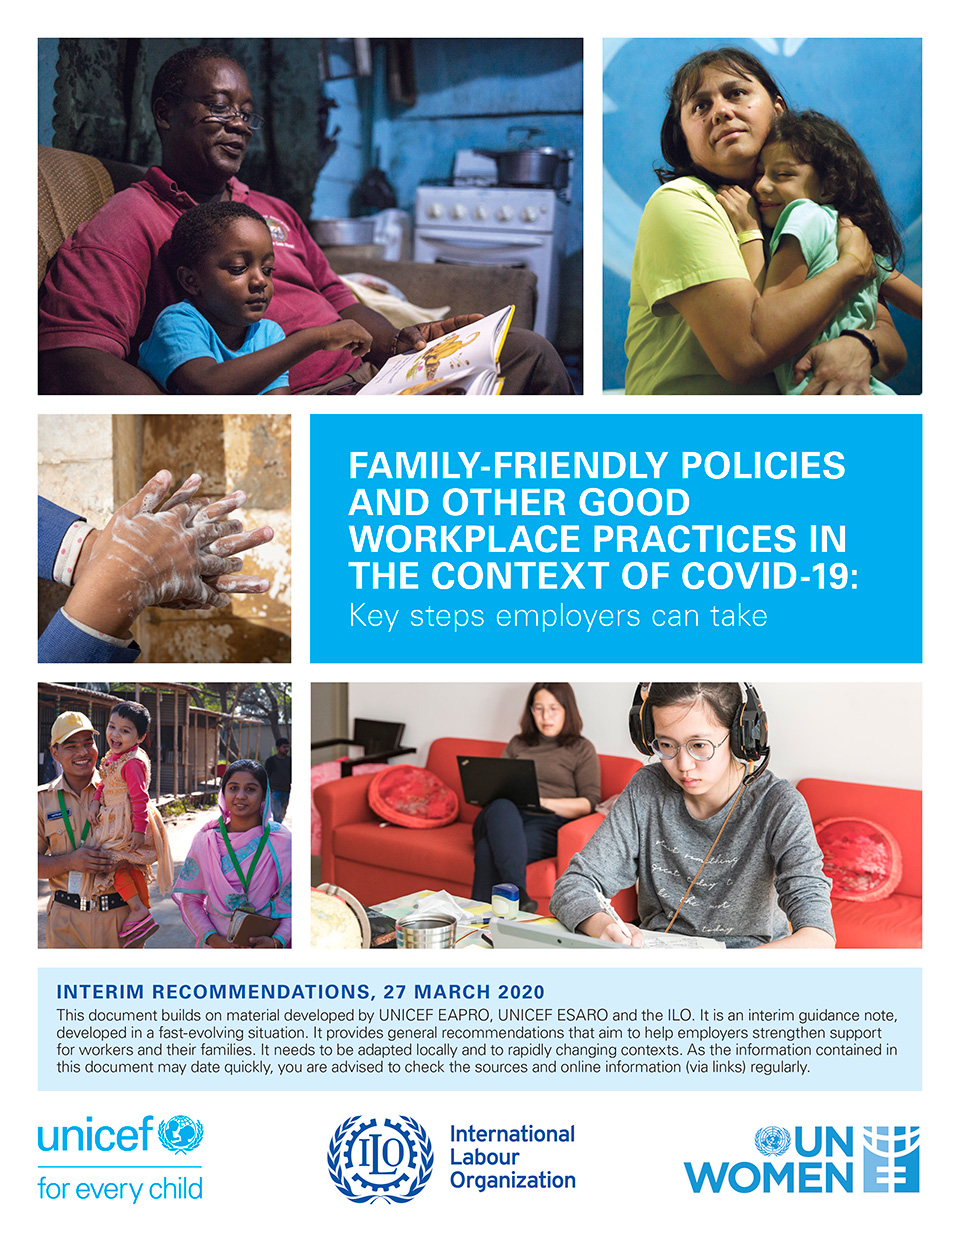 Download the preliminary technical note from UNICEF, ILO and UN Women on family-friendly policies and other good workplace practices in the context of COVID-19 <a href="https://www.unicef.org/documents/family-friendly-policies-and-other-good-workplace-practices-context-covid-19-key-steps">here</a>